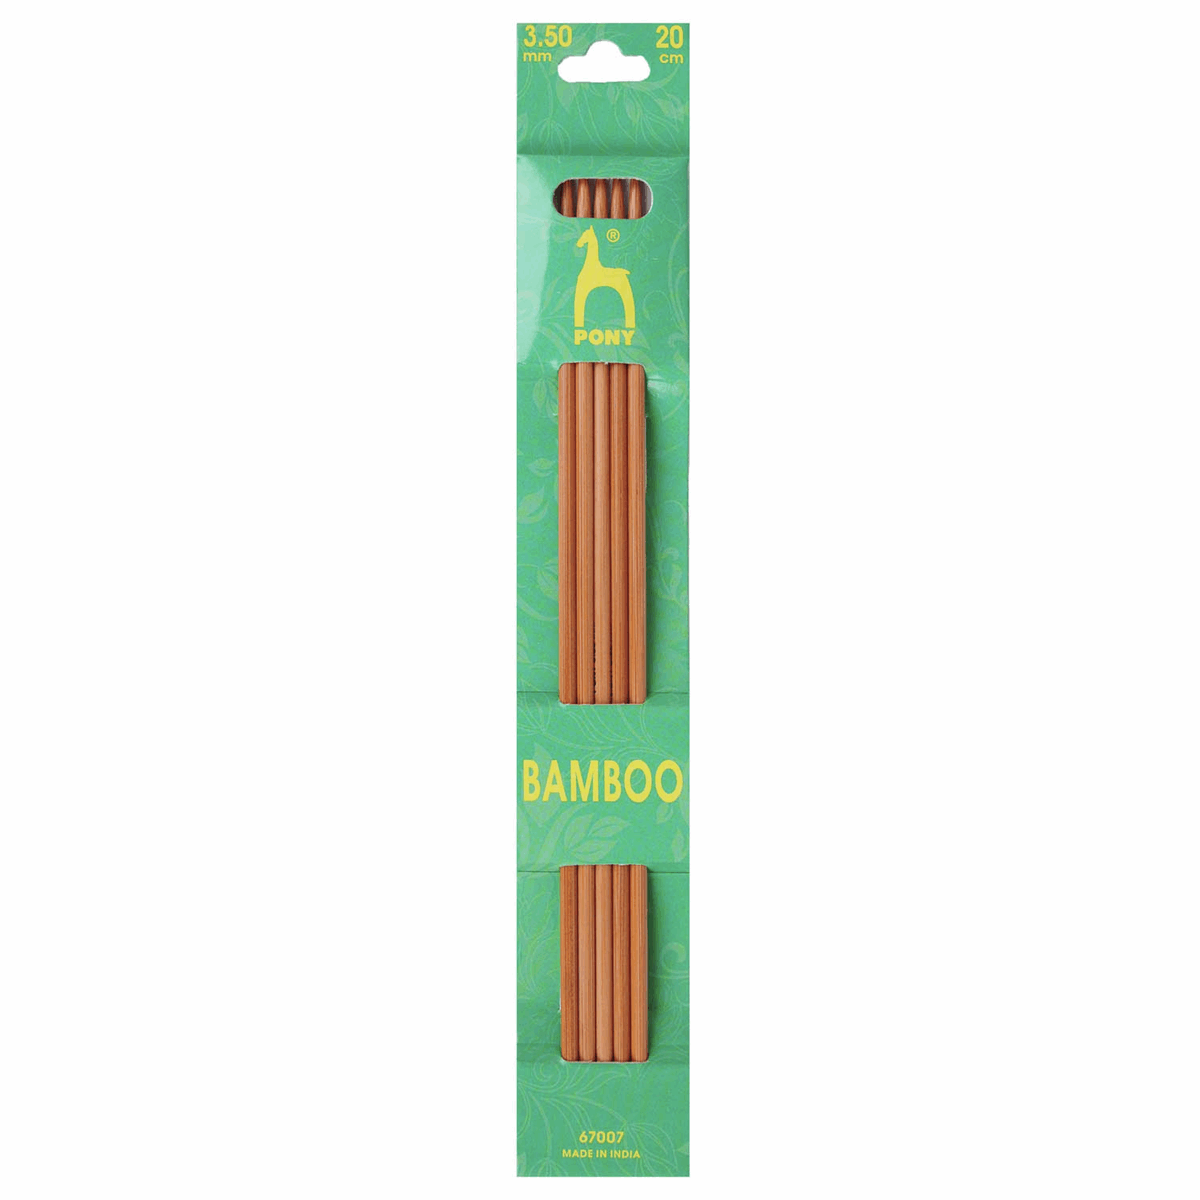 PONY Double-Ended Bamboo Knitting Pins - 20cm x 3.5mm (Set of 5)